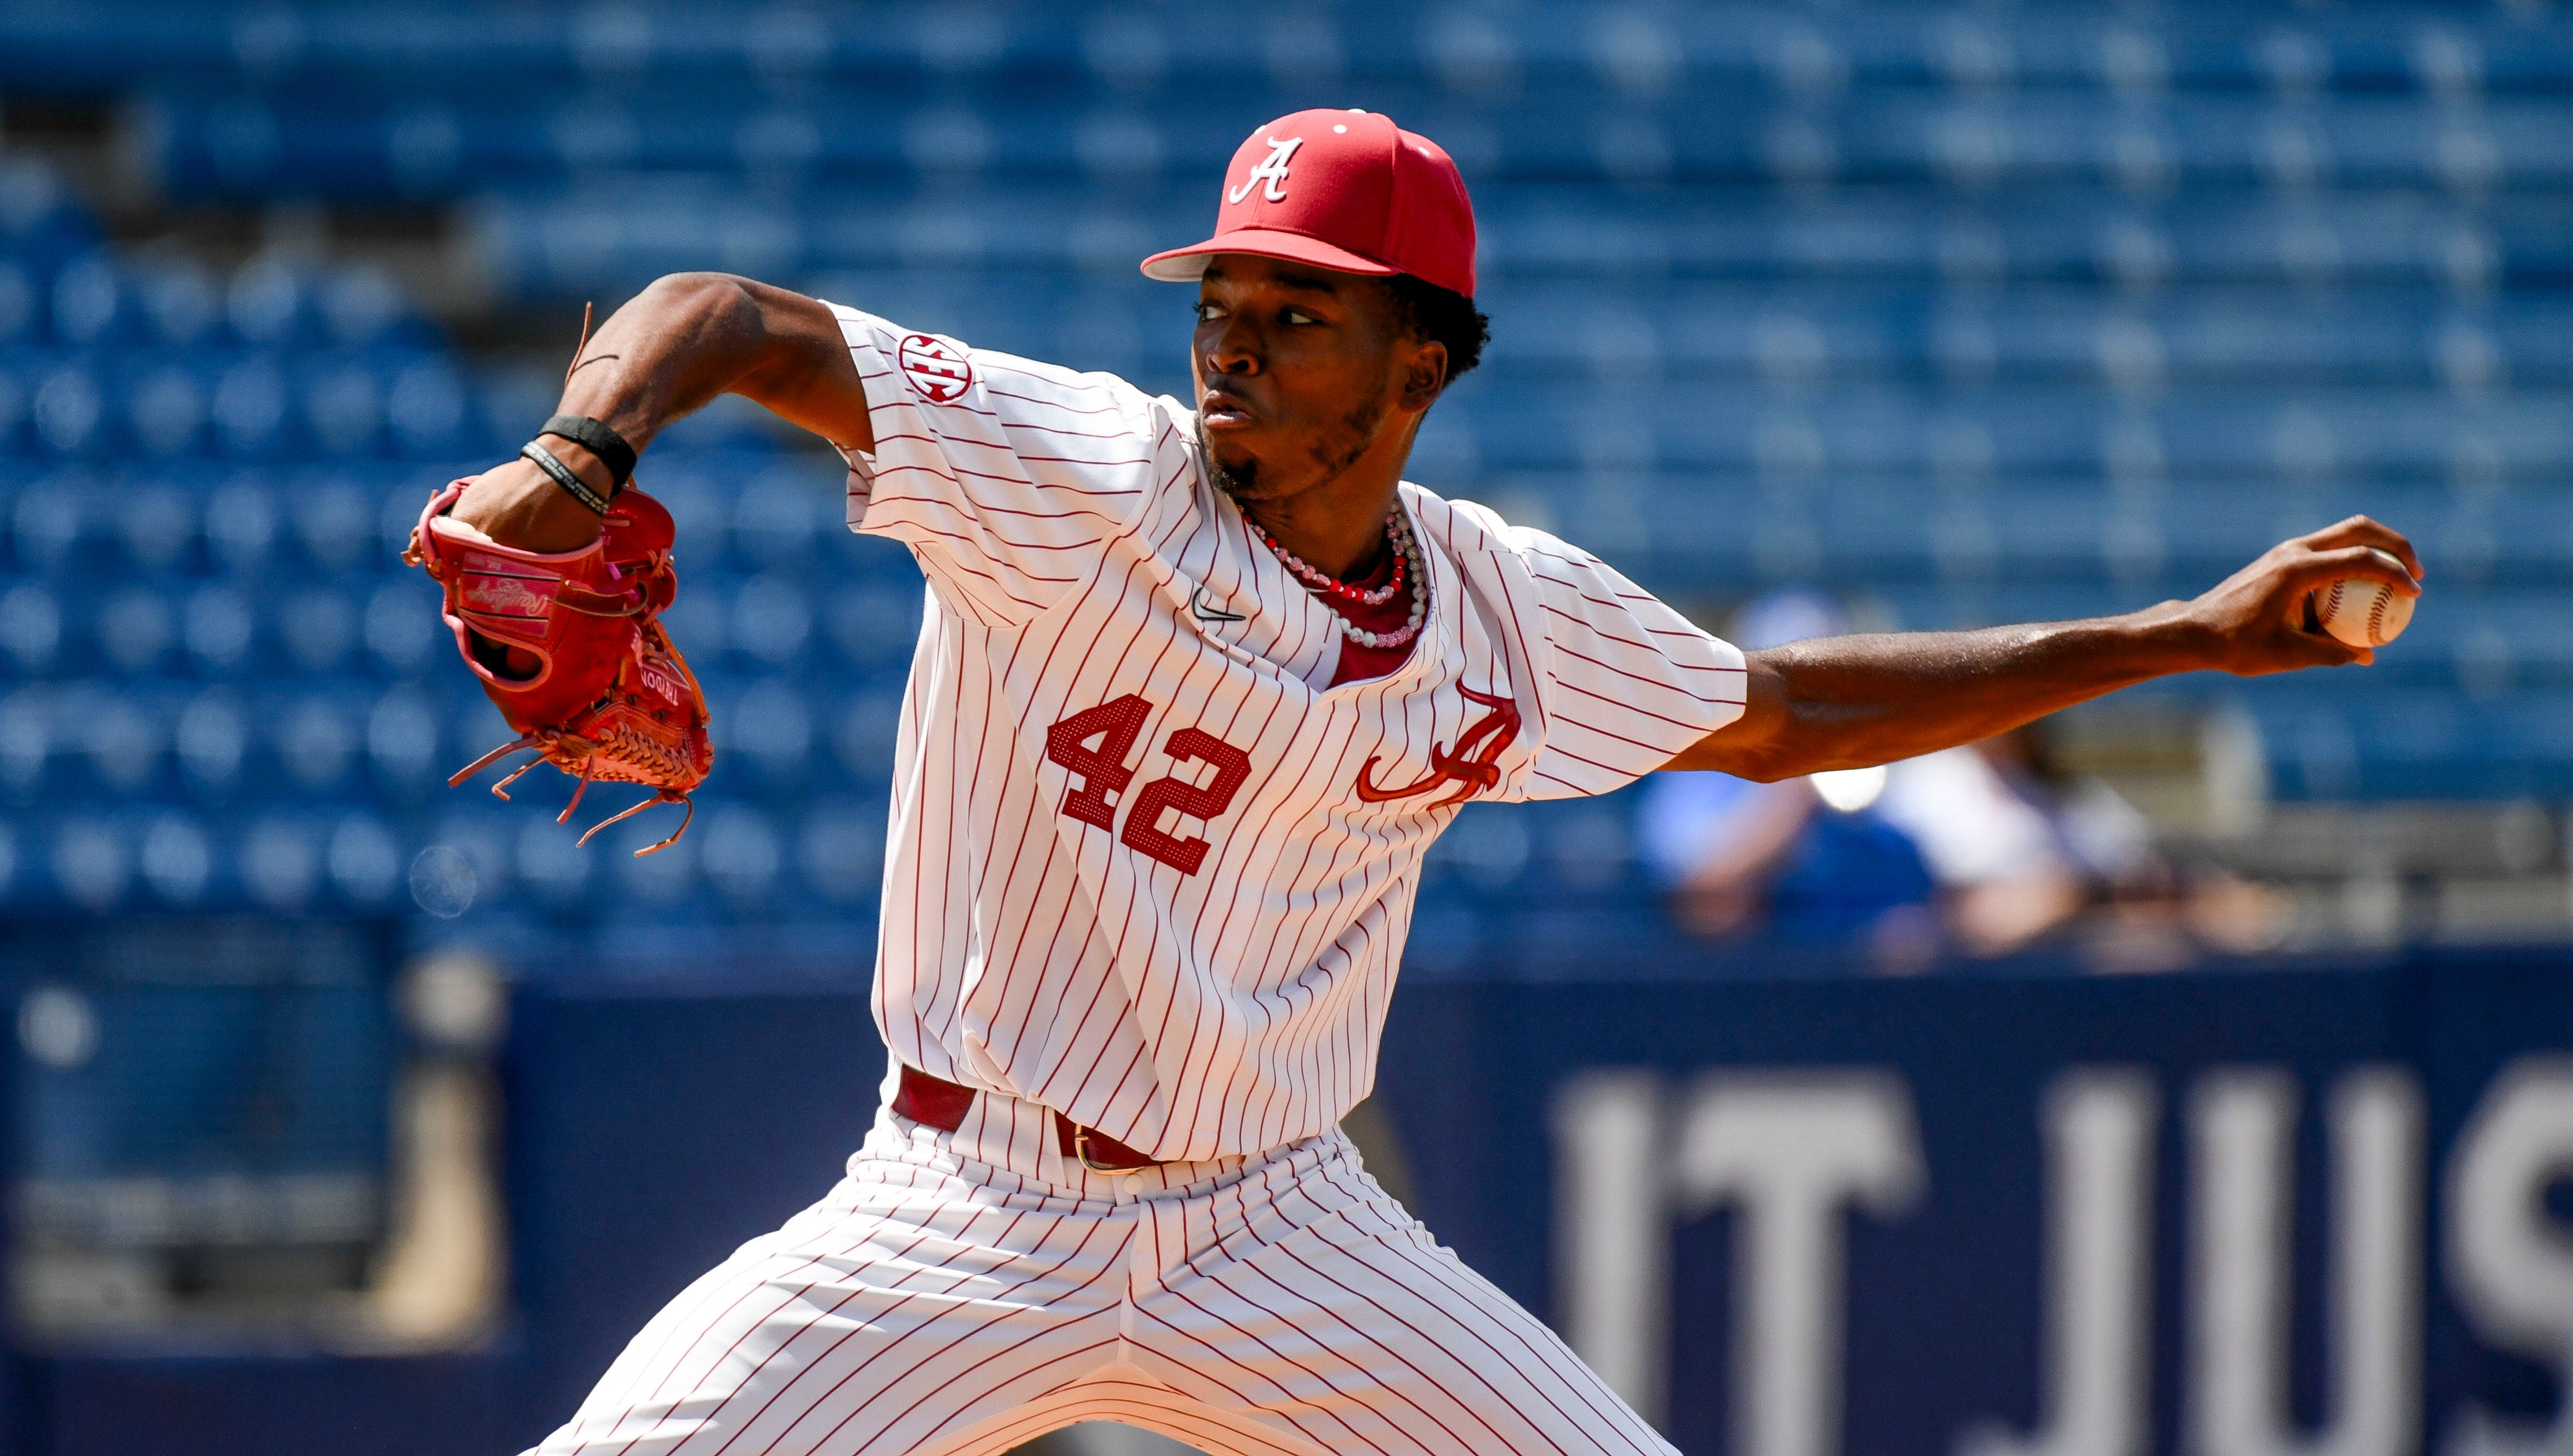 Alabama baseball transfer portal tracker: who's in, who's out for the Crimson Tide